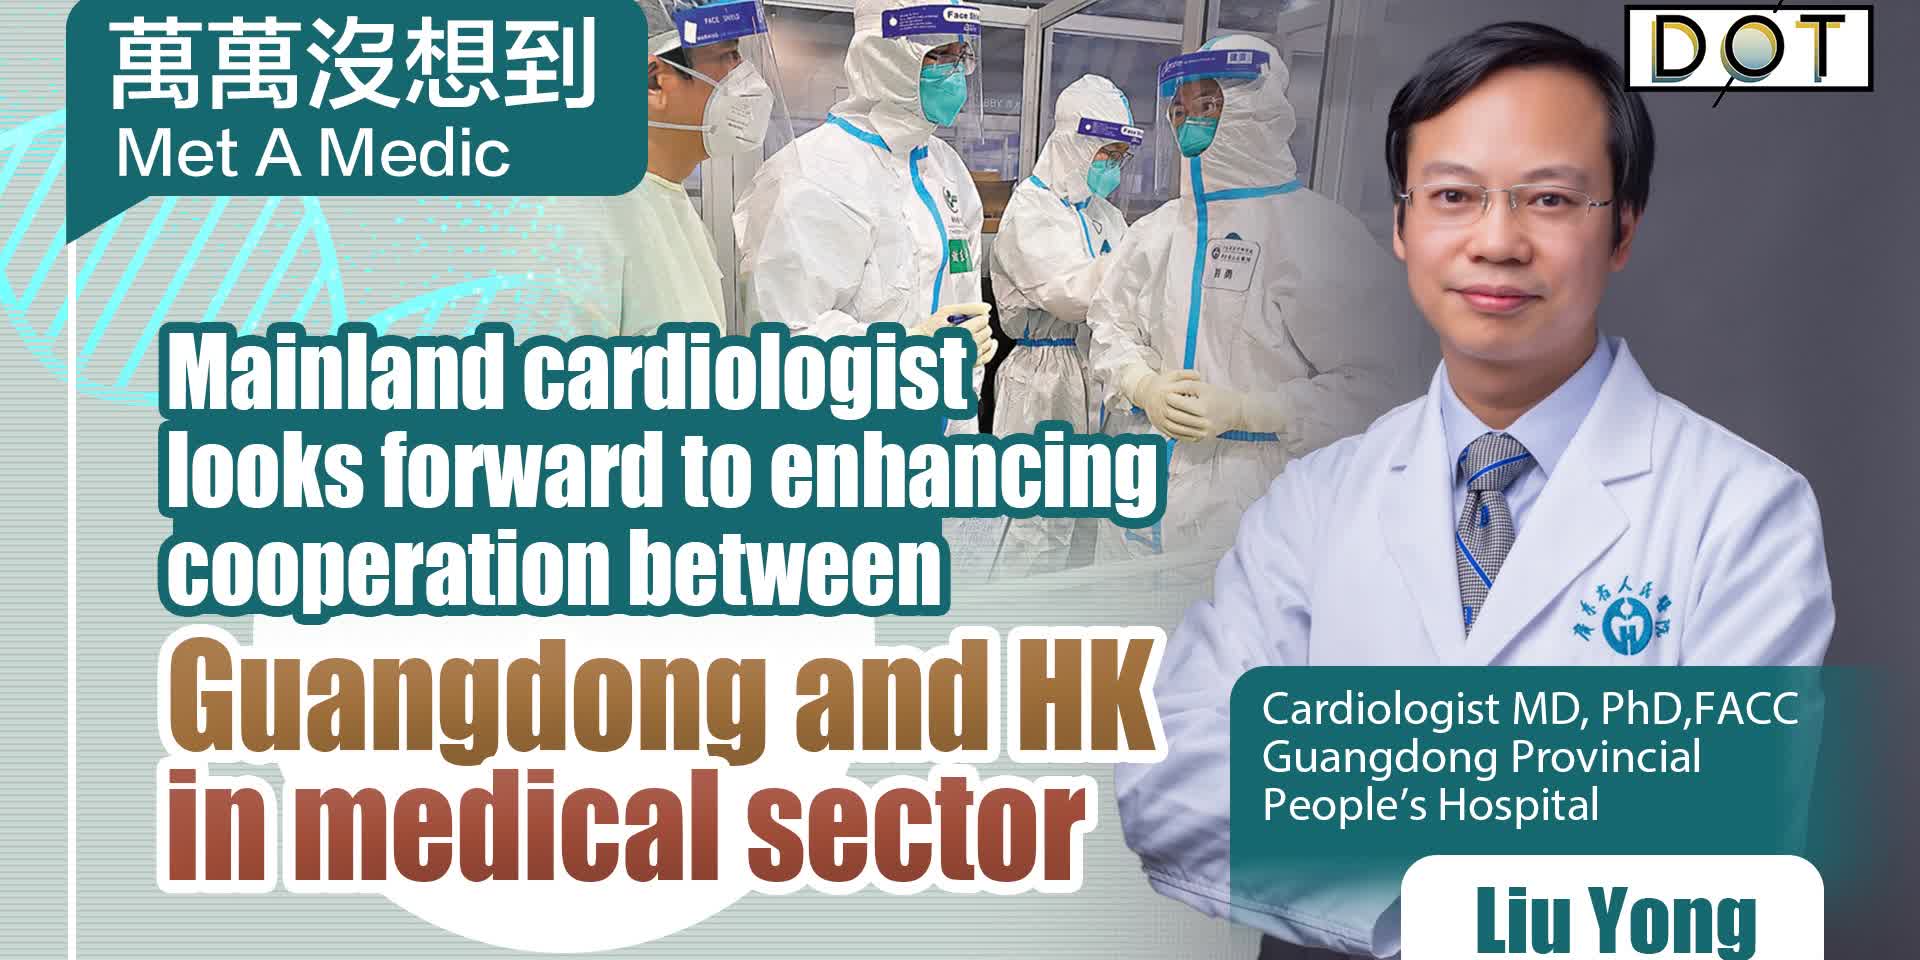 Met A Medic | Mainland cardiologist looks forward to enhancing cooperation between Guangdong and HK in medical sector